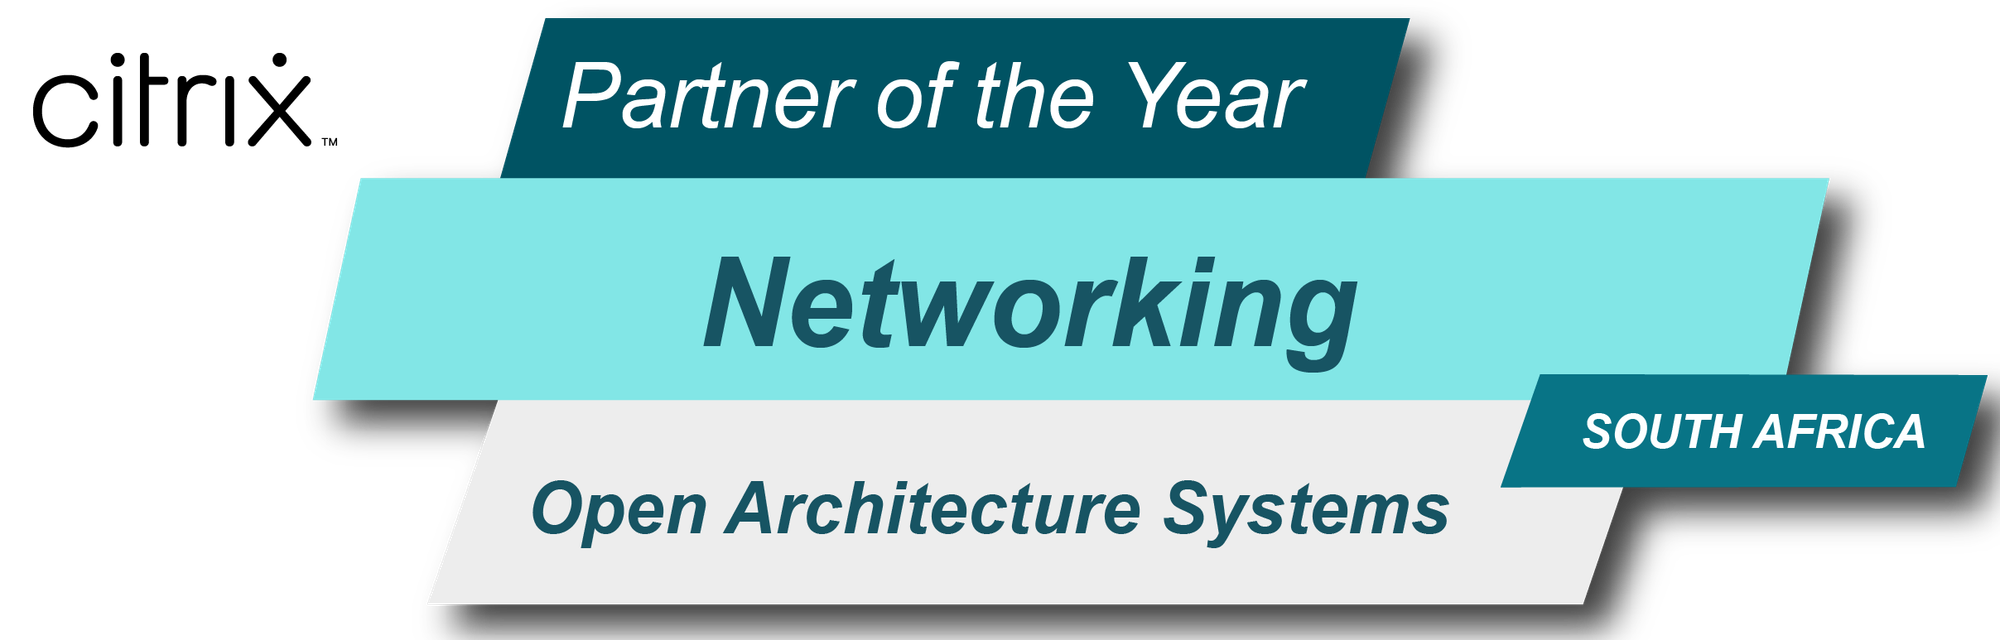 CITRIX PARTNER OF THE YEAR - NETWORKING